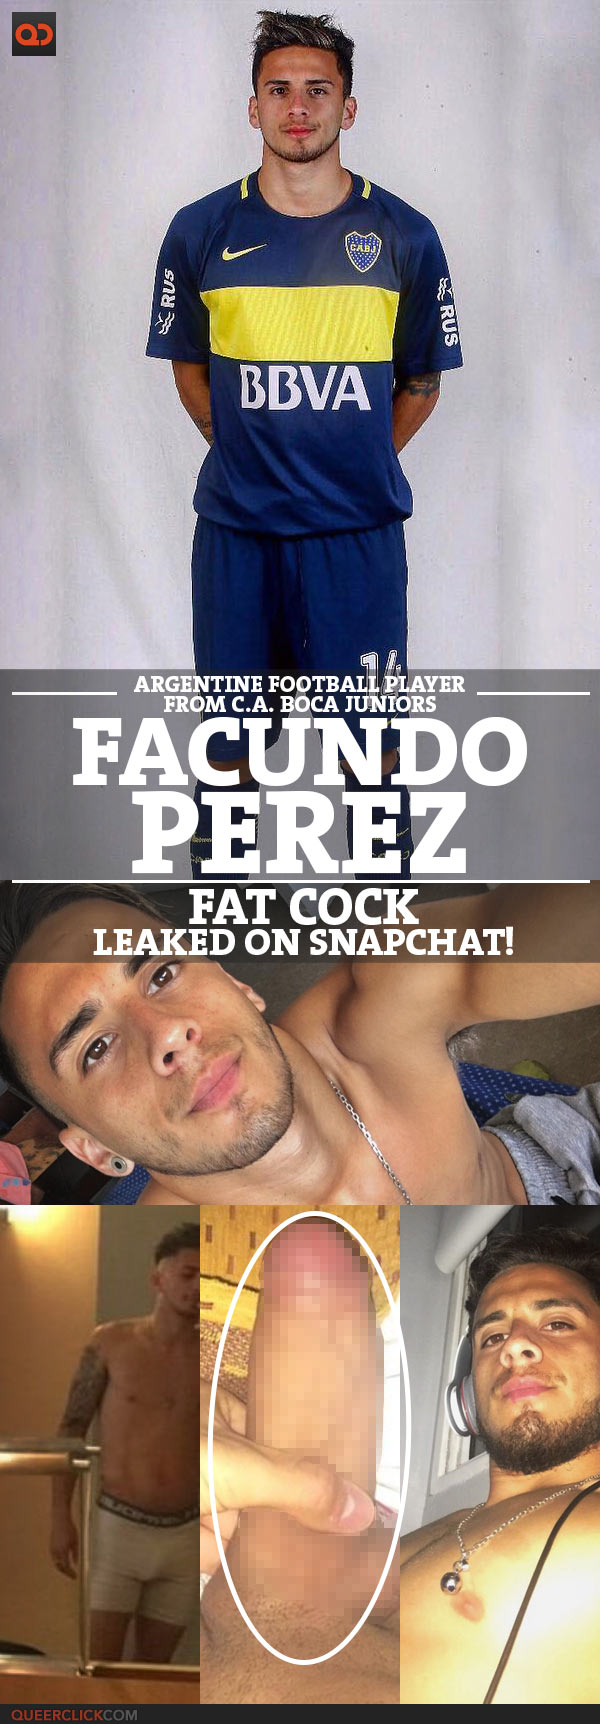 Facundo Perez, Argentine Football Player From C.A. Boca Juniors, Alleged Fat Cock Leaked On Snapchat!